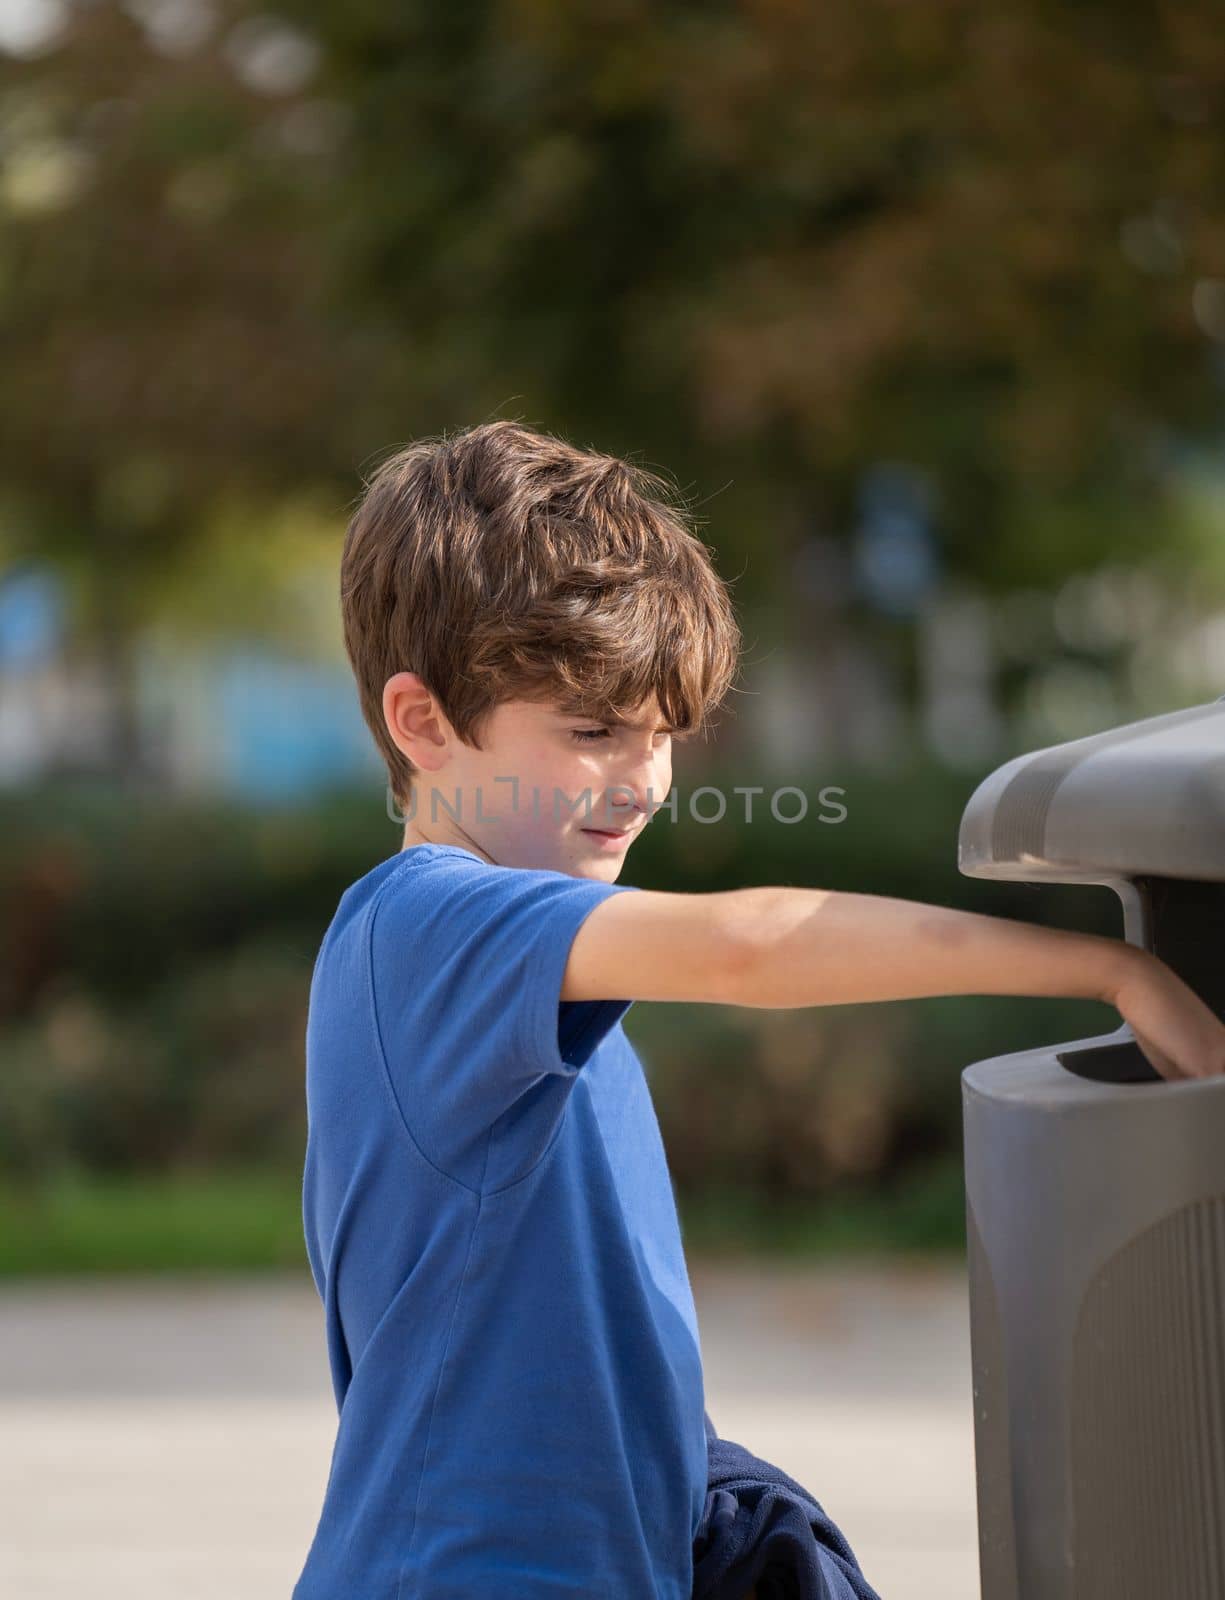 Caucasian kid 9 year old try to throw trash in public trashcan. Concept of garbage, Recycle environment, save world